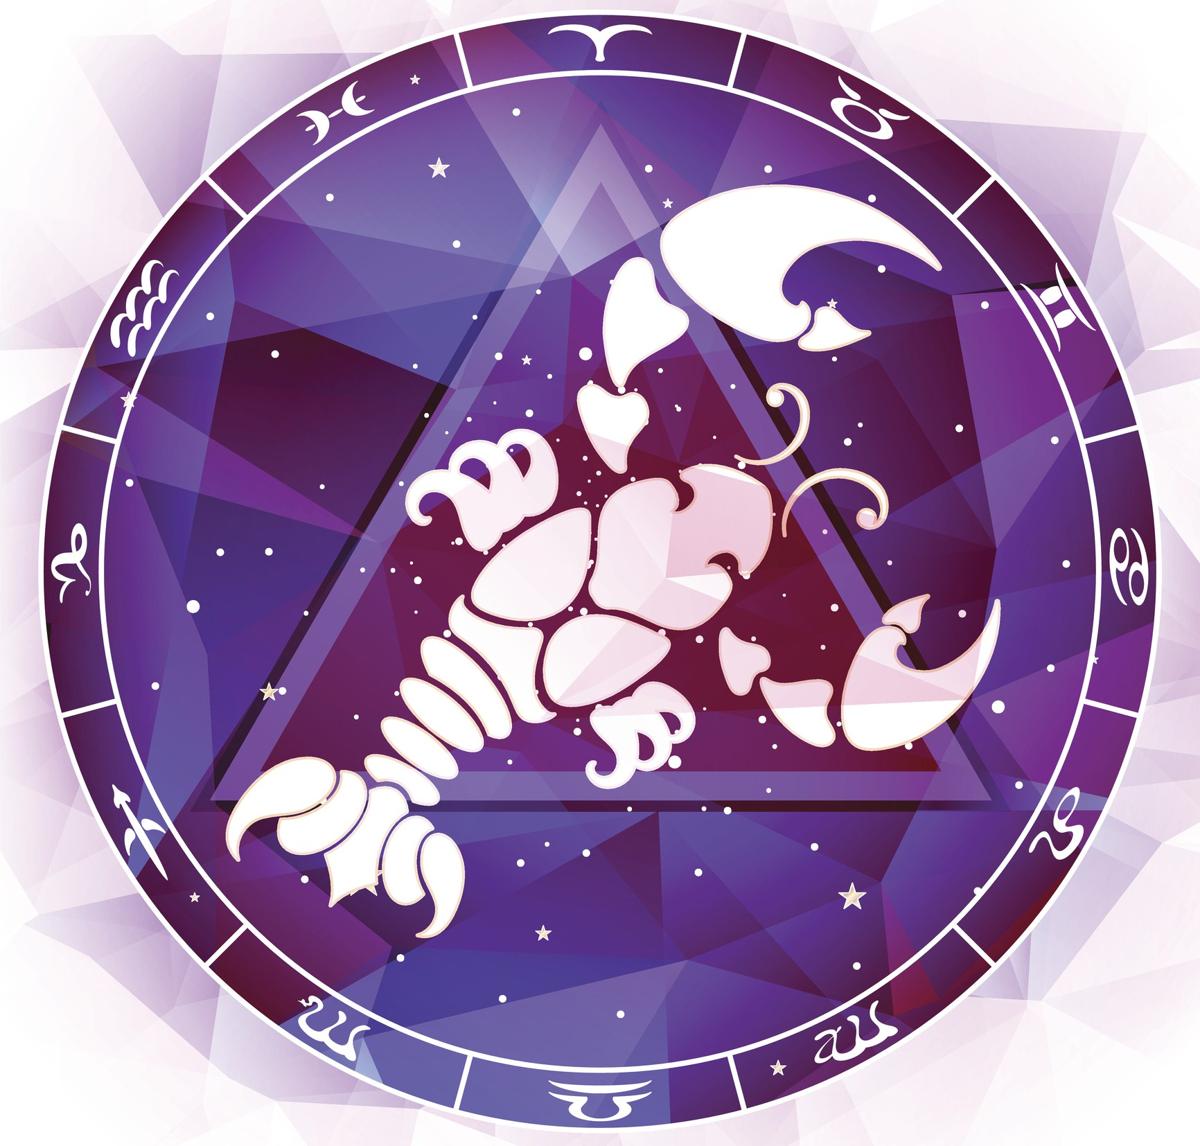 cancer astrology wikipedia